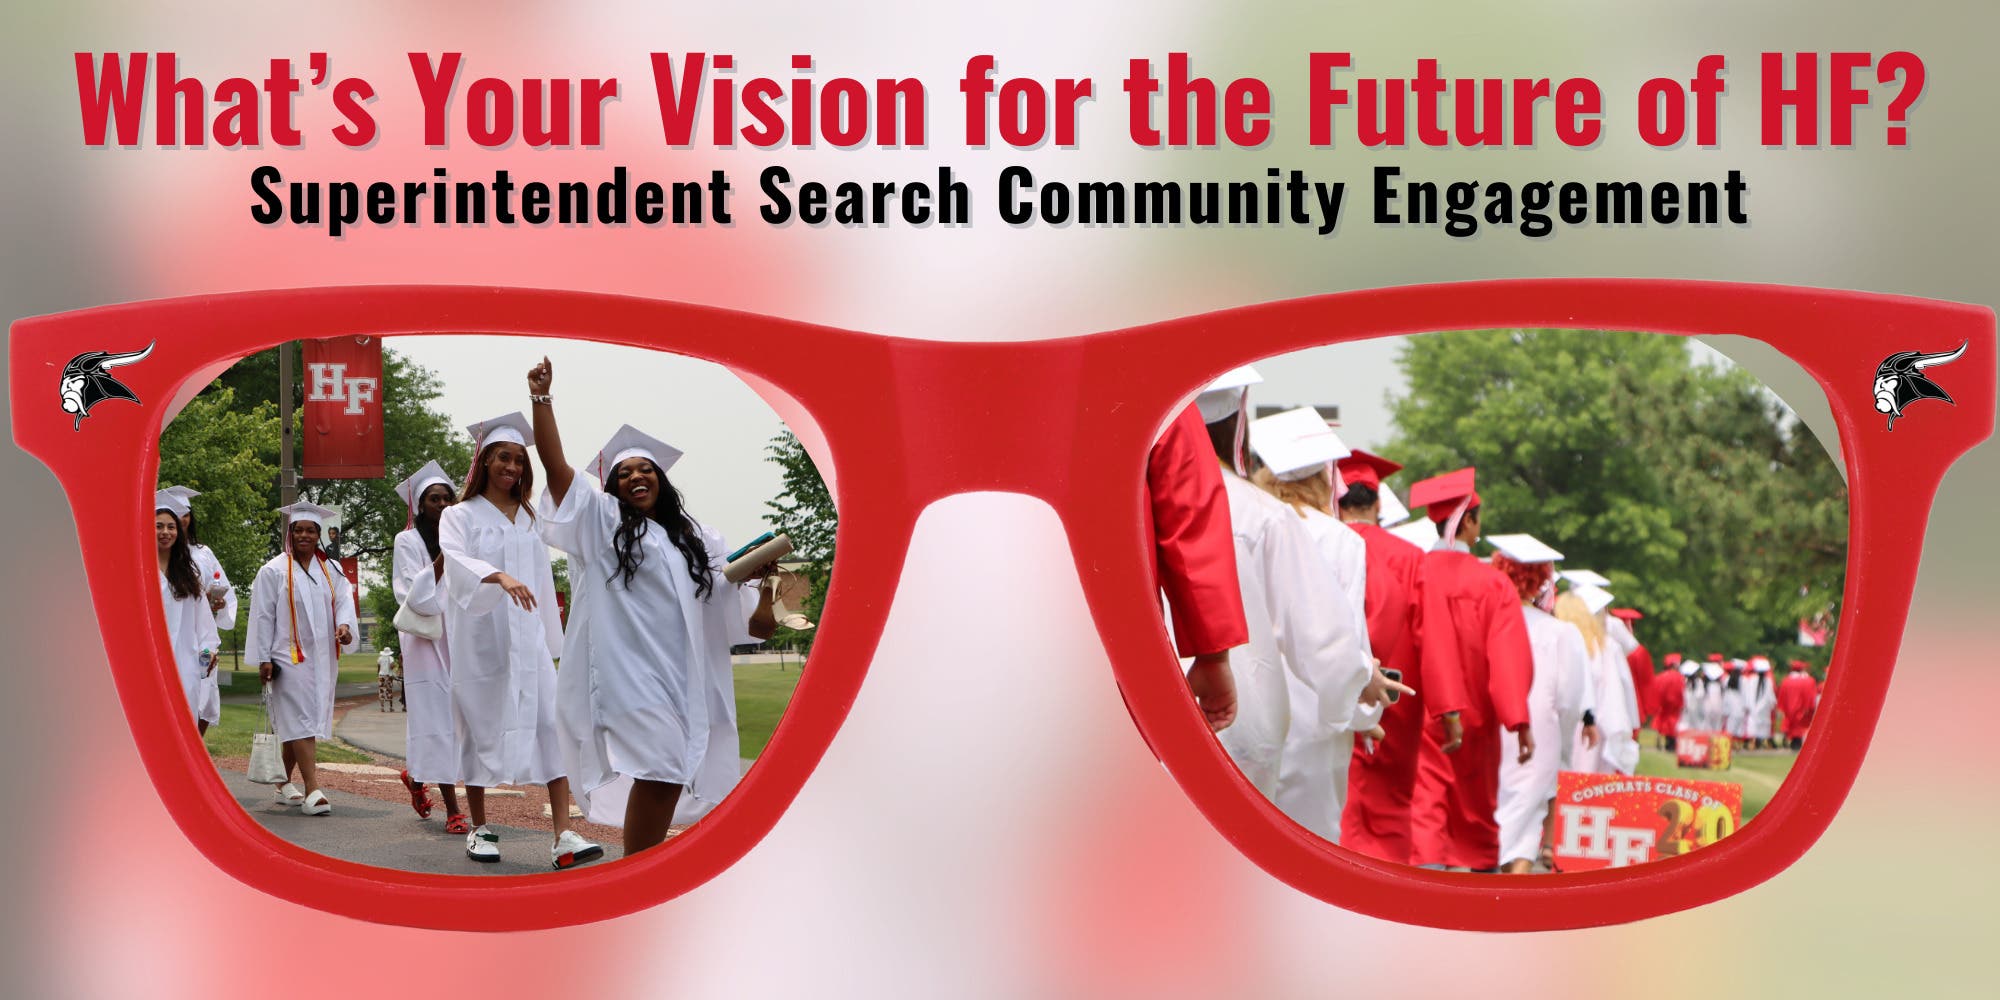 HF Superintendent Search Community Gathering May 20 @ 6:30 p.m.